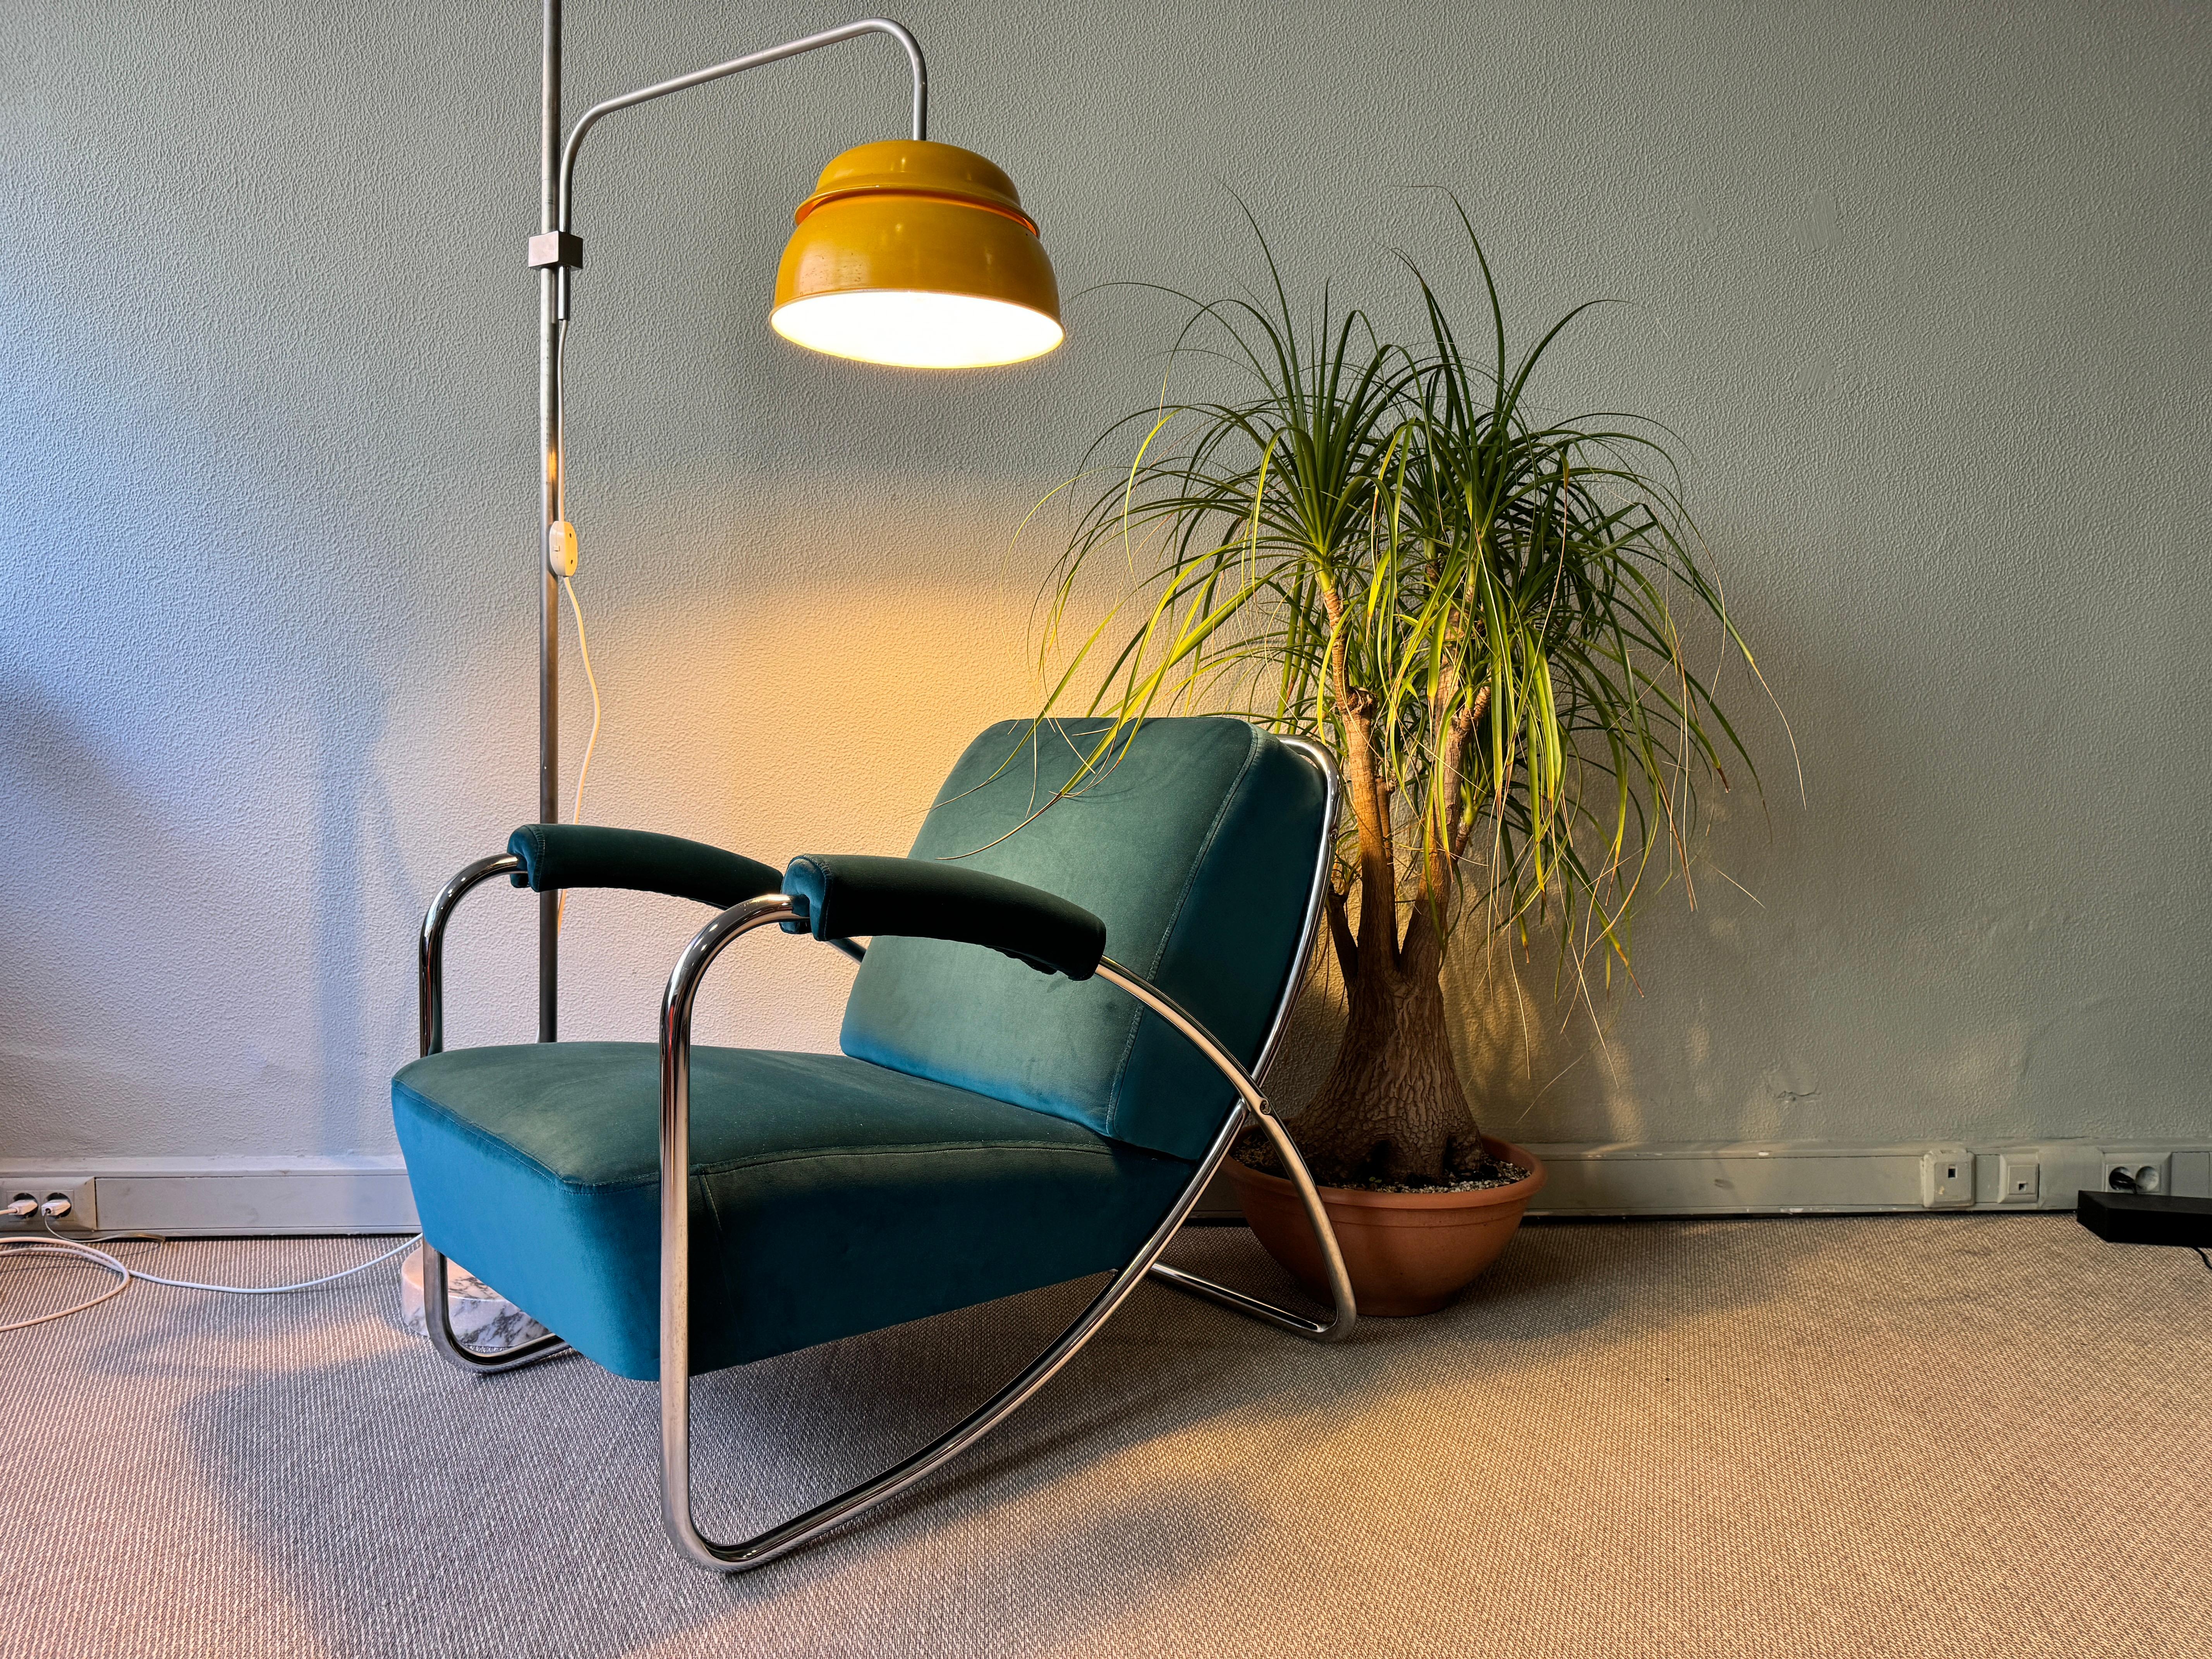 Introducing this Streamline Armchair from Olaio, a vintage gem that exudes sophistication and elegance. Originally produced for Palácio Nacional da Cidadela in 1930's Portugal, this armchair boasts a sleek and modern look, thanks to its steel tube